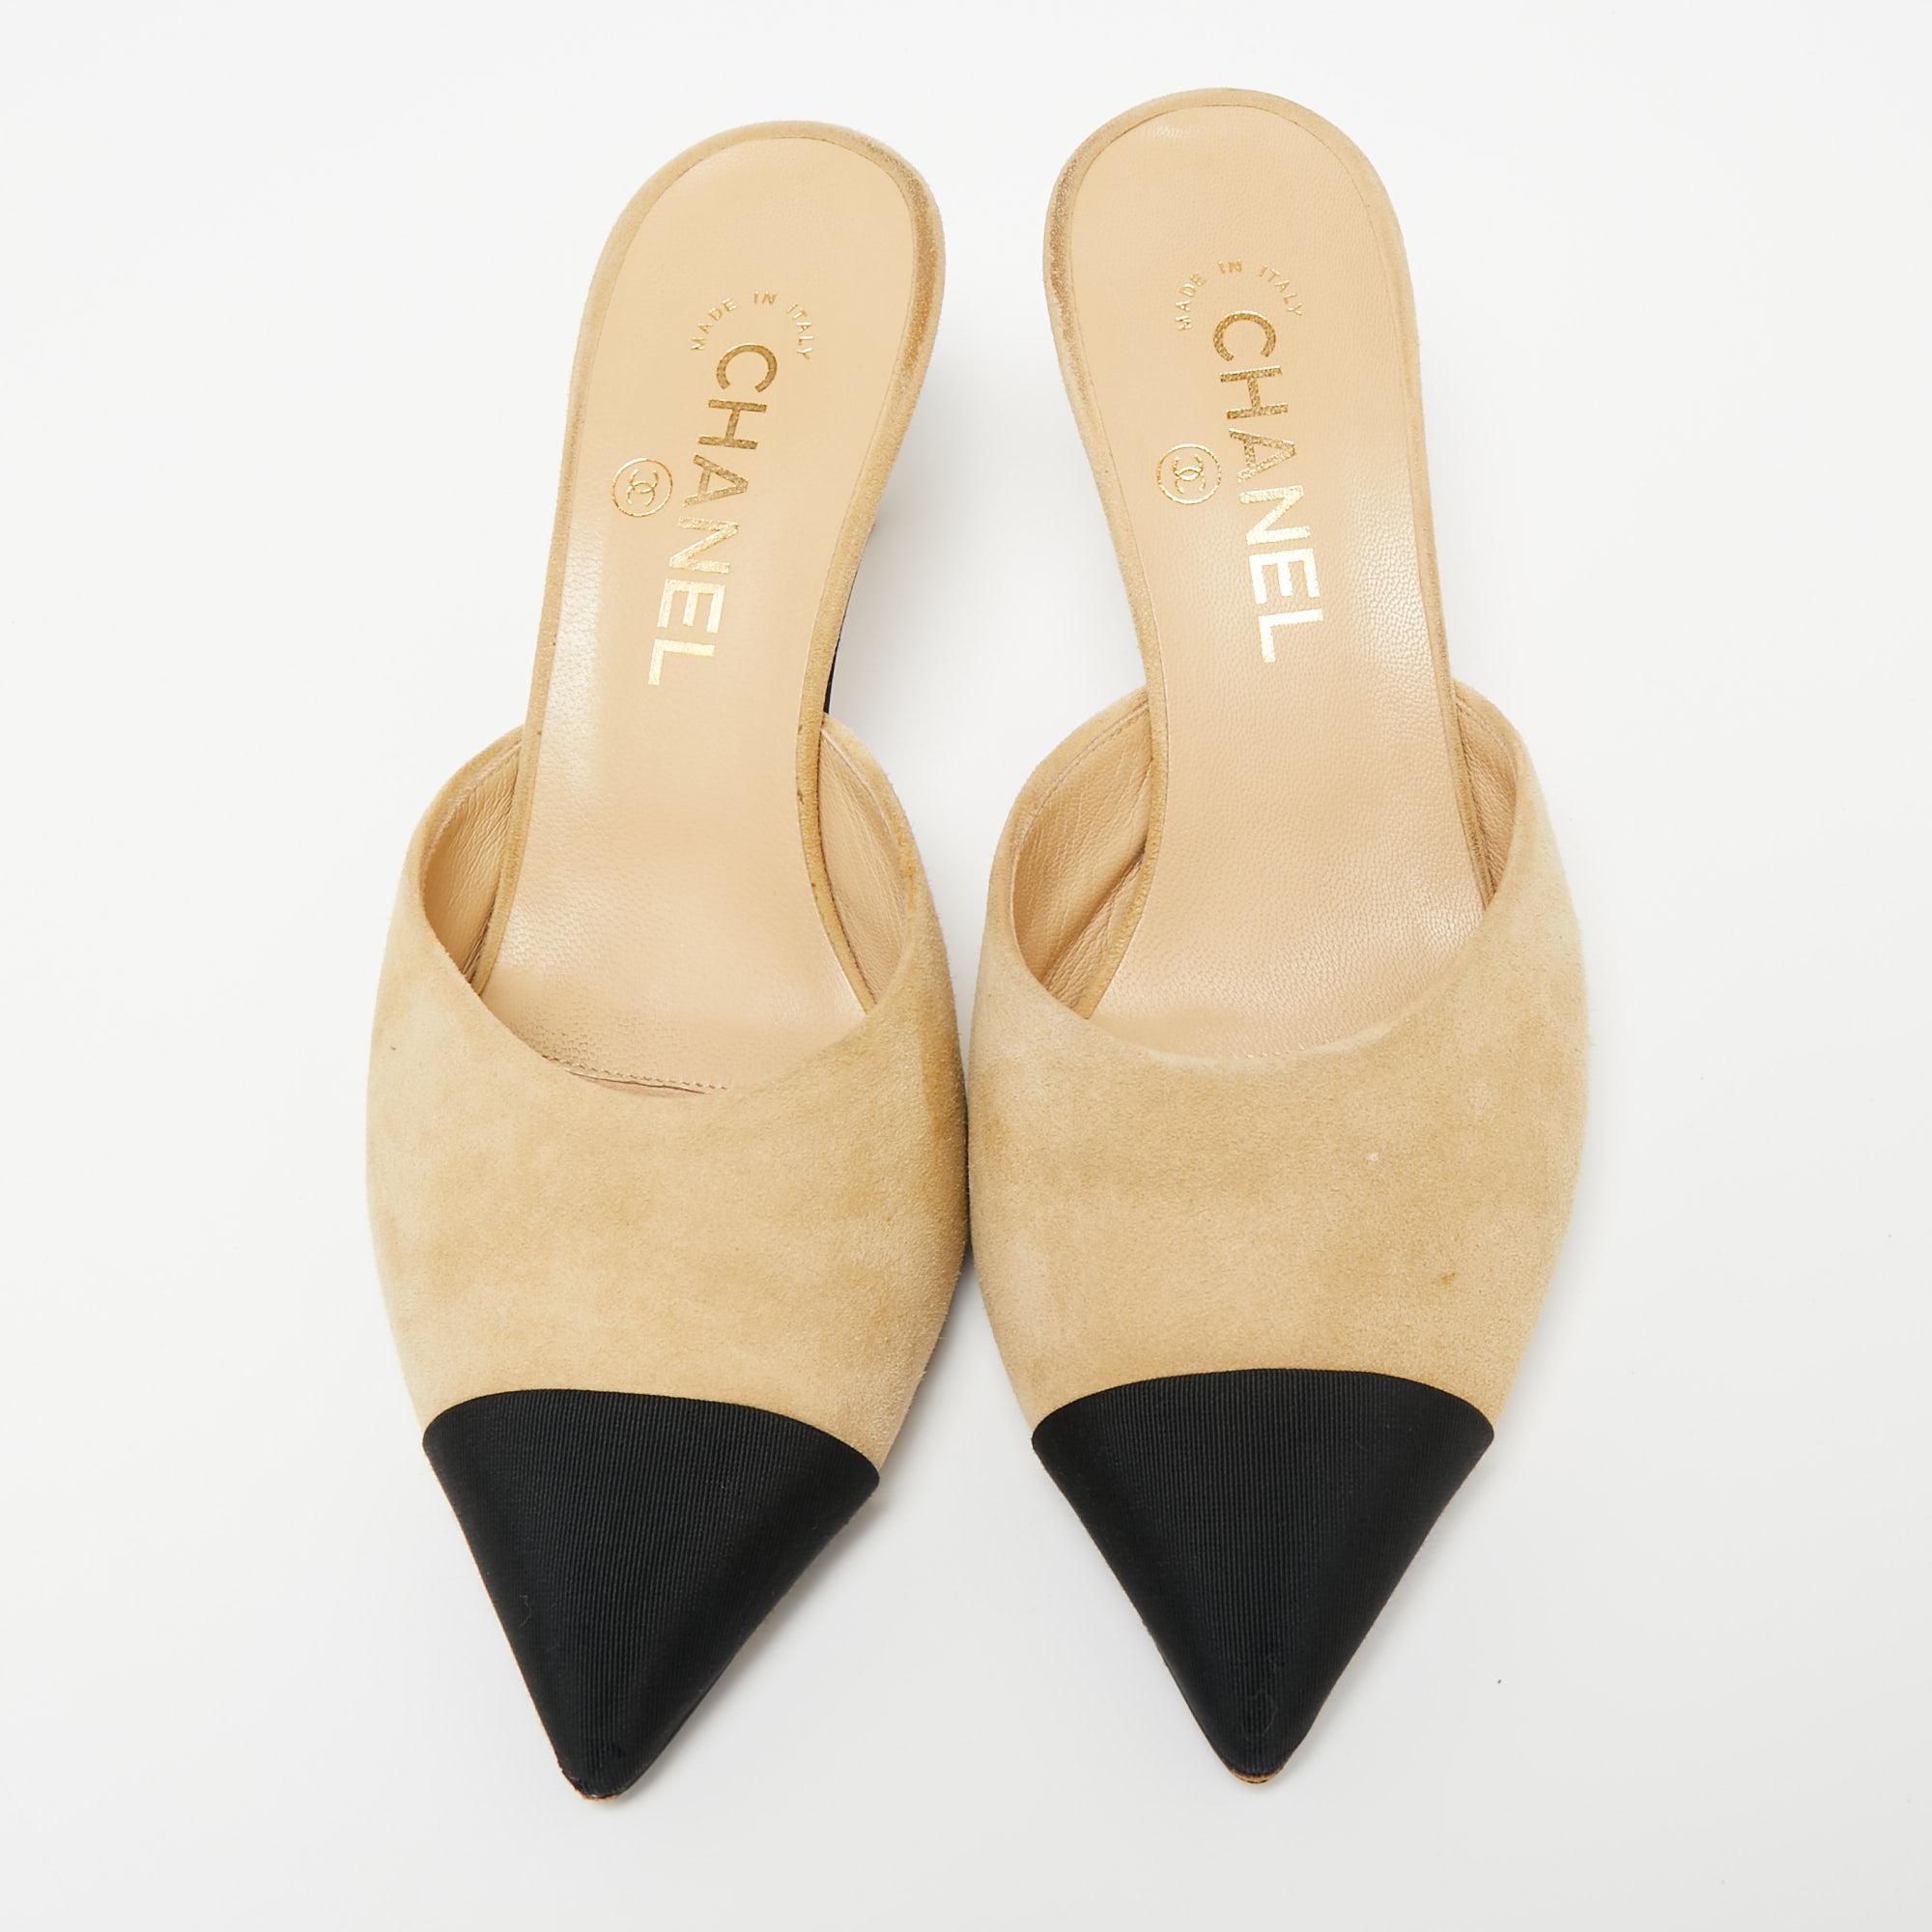 Chanel's creations are known for their unique designs that emanate the label's feminine verve and immaculate craftsmanship that makes their creations last season after season. Crafted from suede in a beige shade, these mules have been designed with